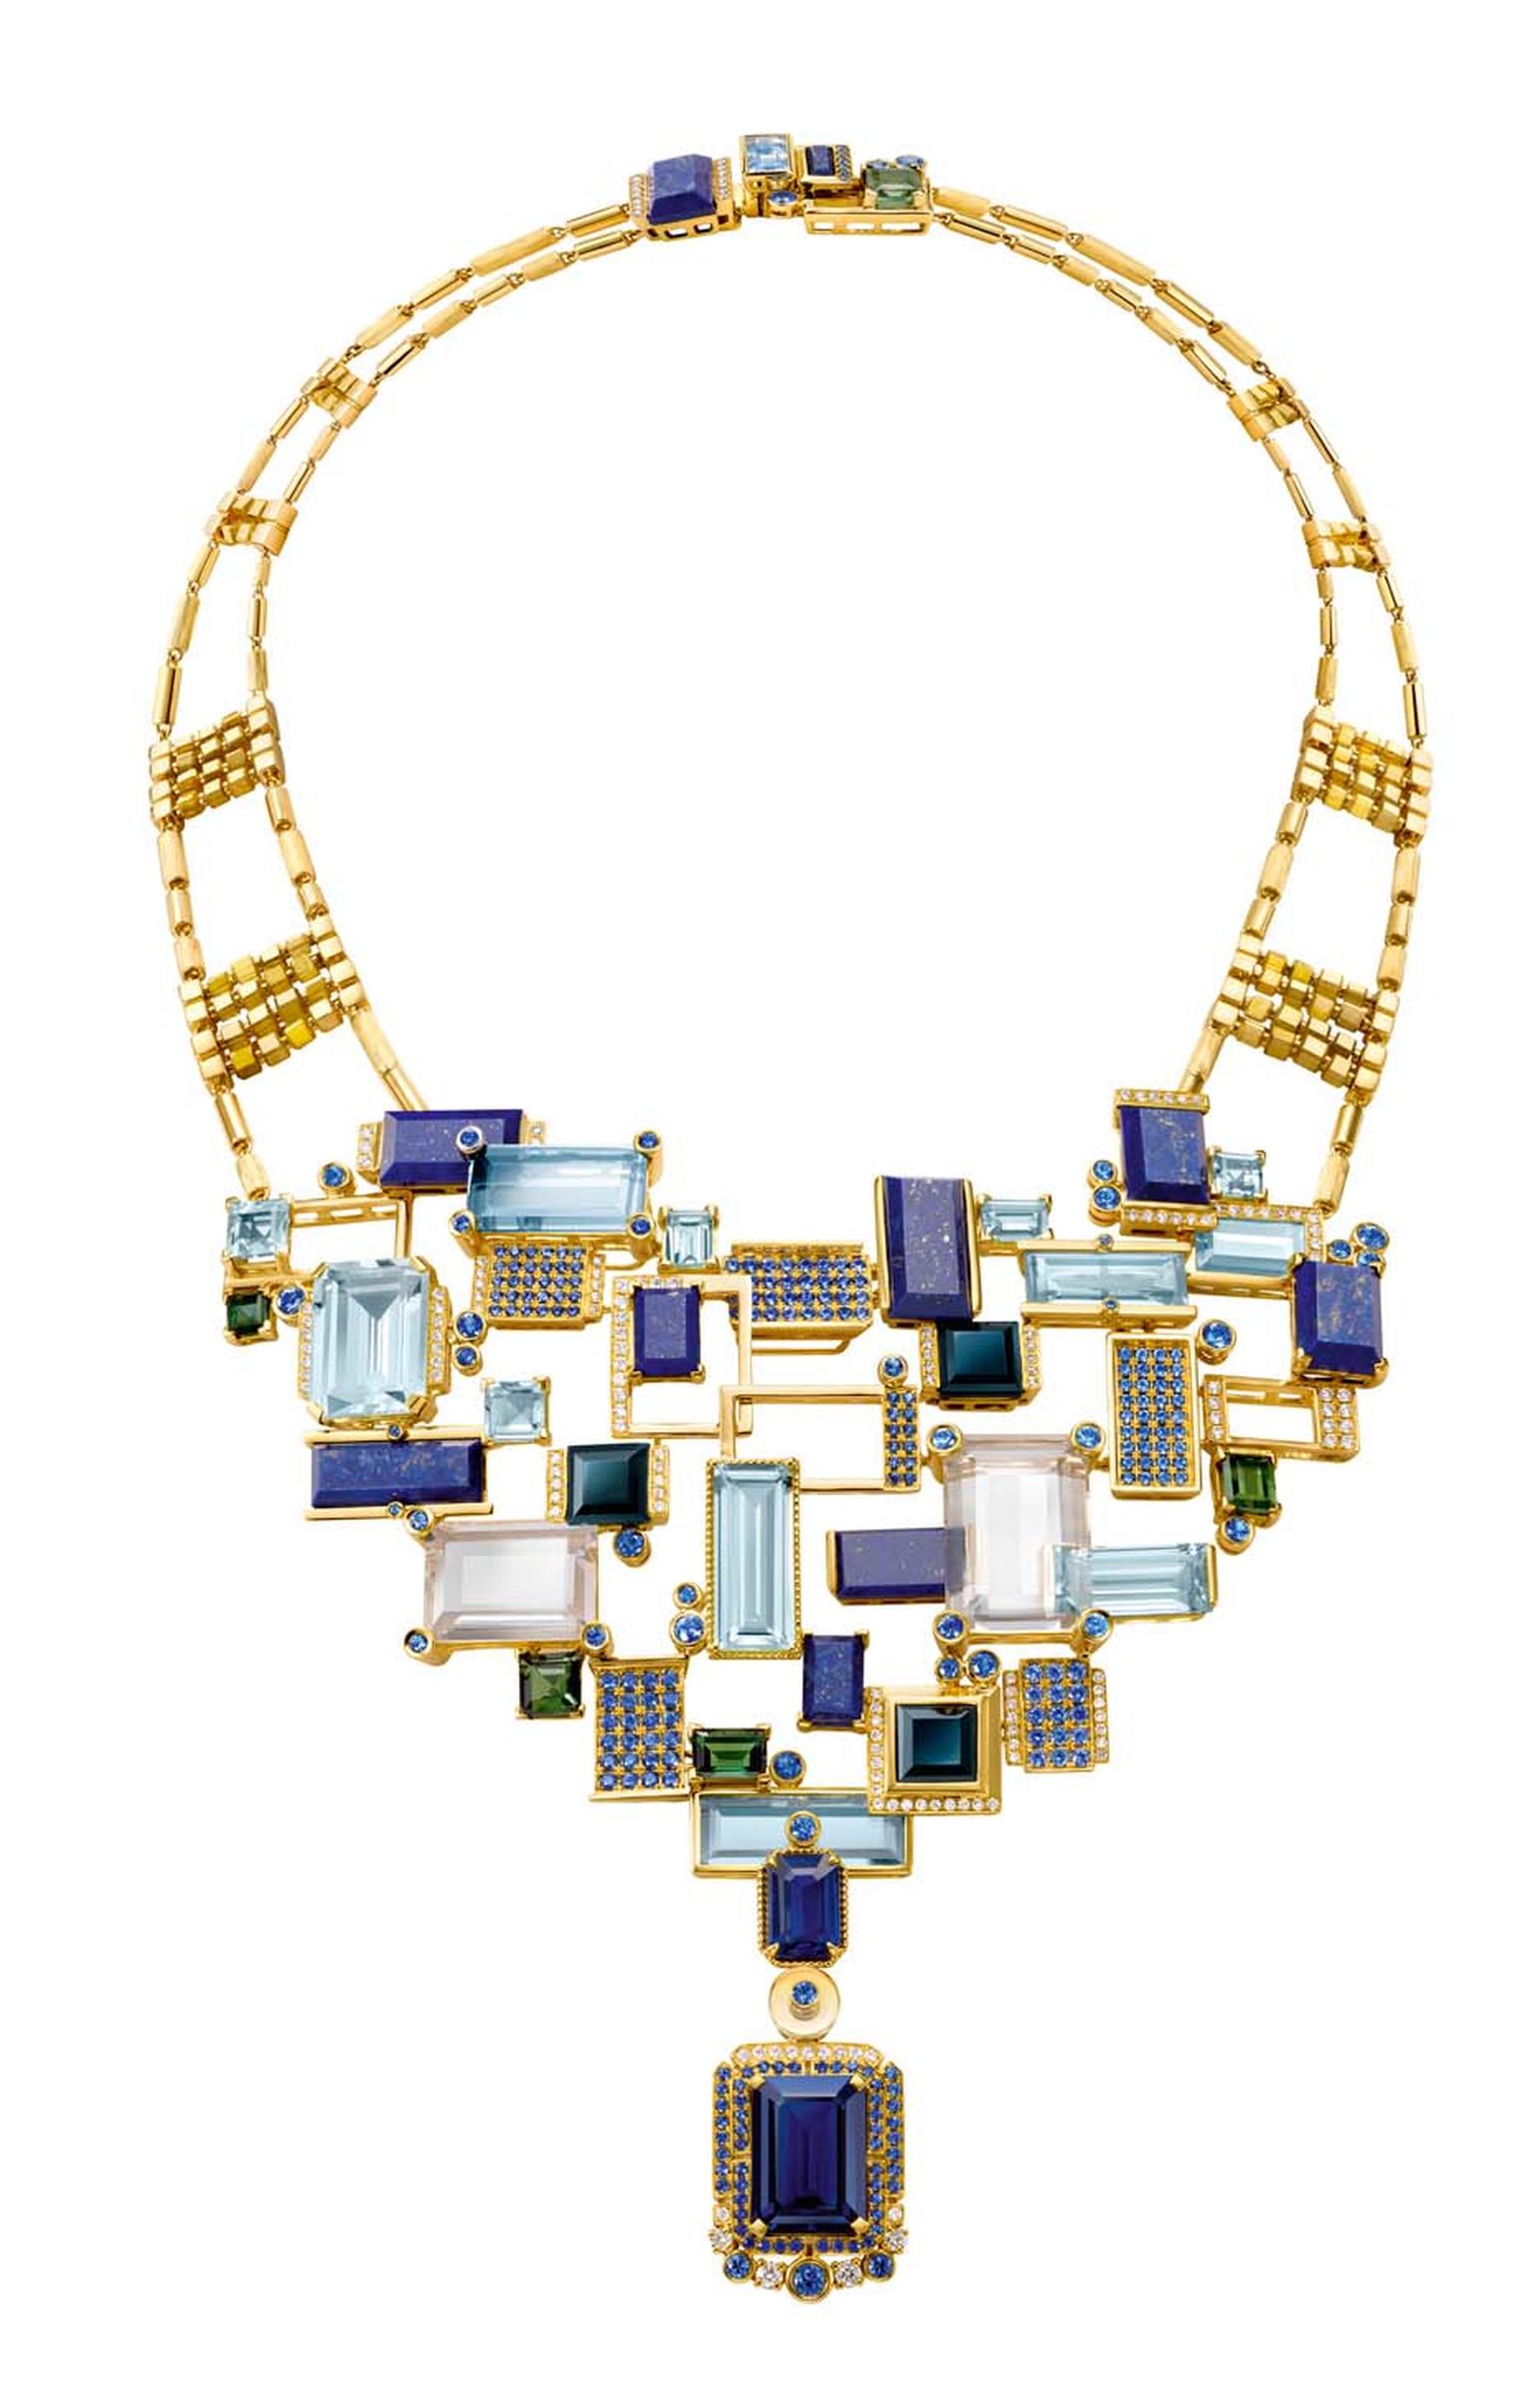 Chow Tai Fook's Reflections of Siem Halcyon necklace, with emerald-cut aquamarines, lapis lazuli, tourmalines and blue sapphires mounted to resemble the floating villages on Lake Tonlé Sap, forms part of the Chinese jeweller's fourth annual collection of 